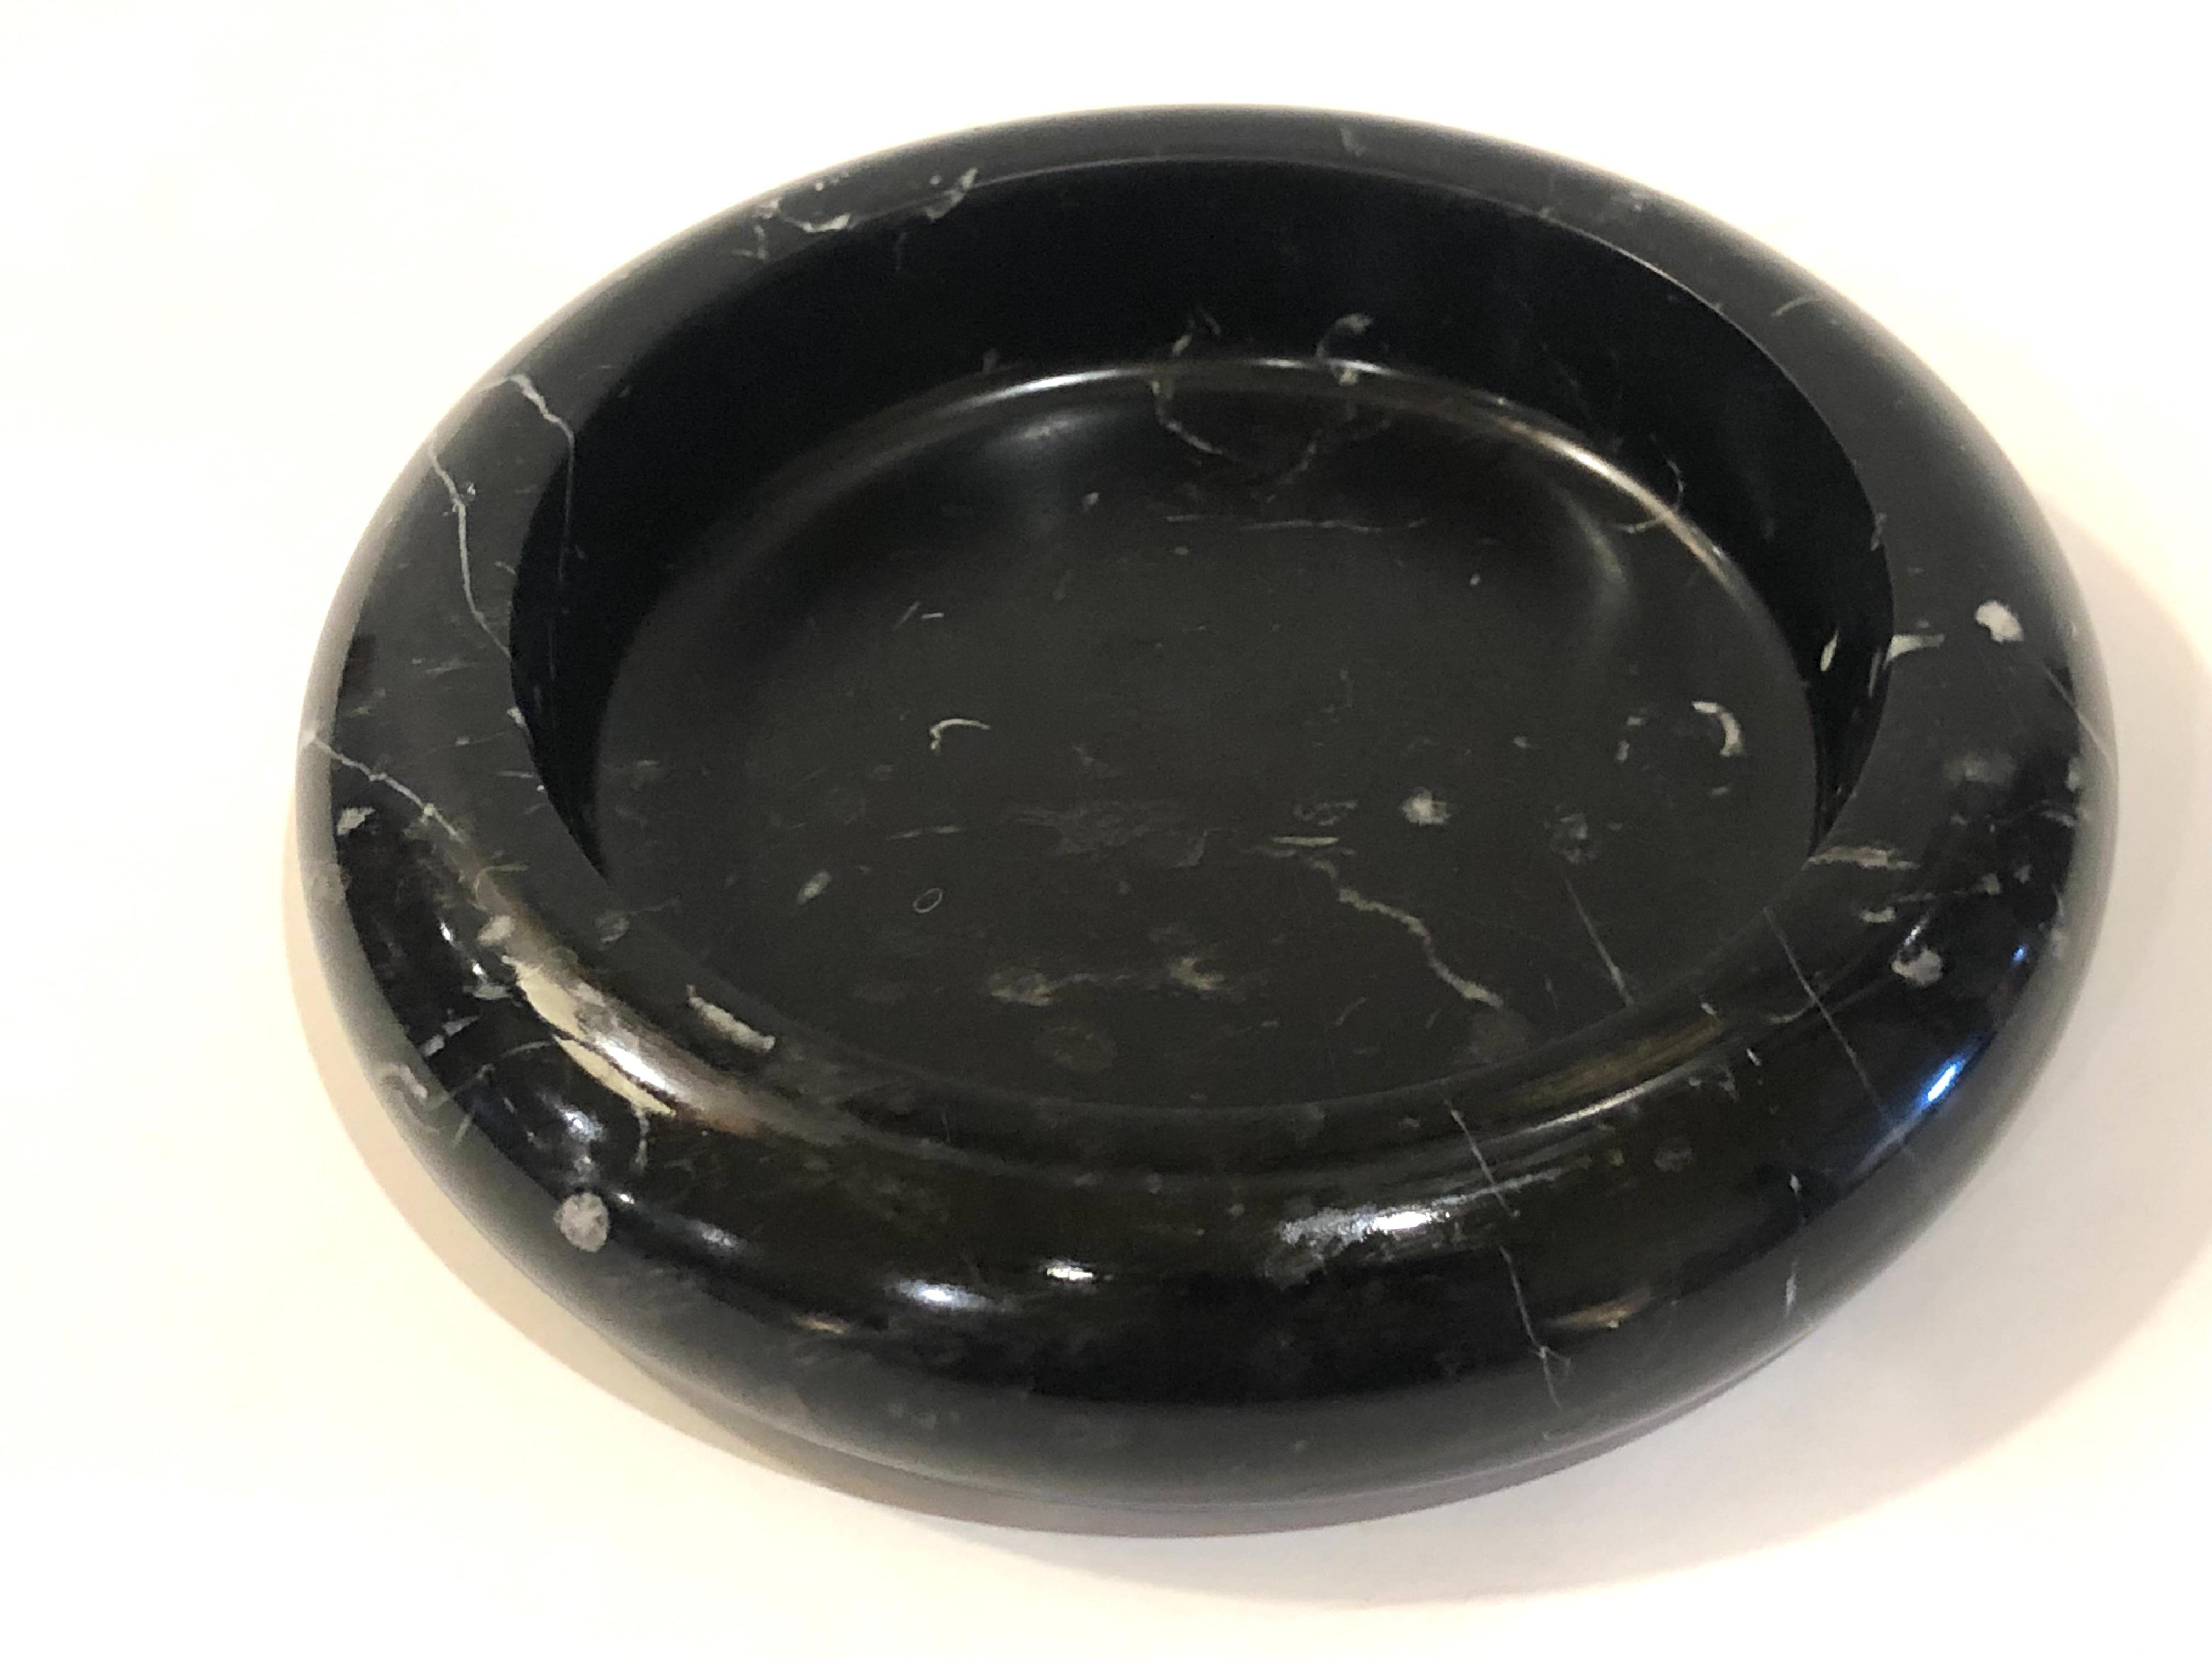 Beautiful petite cendrier or low candy dish bowl, circa 1960s in black marble nice condition some light wear in the center no scratches just a dull finish due to age.